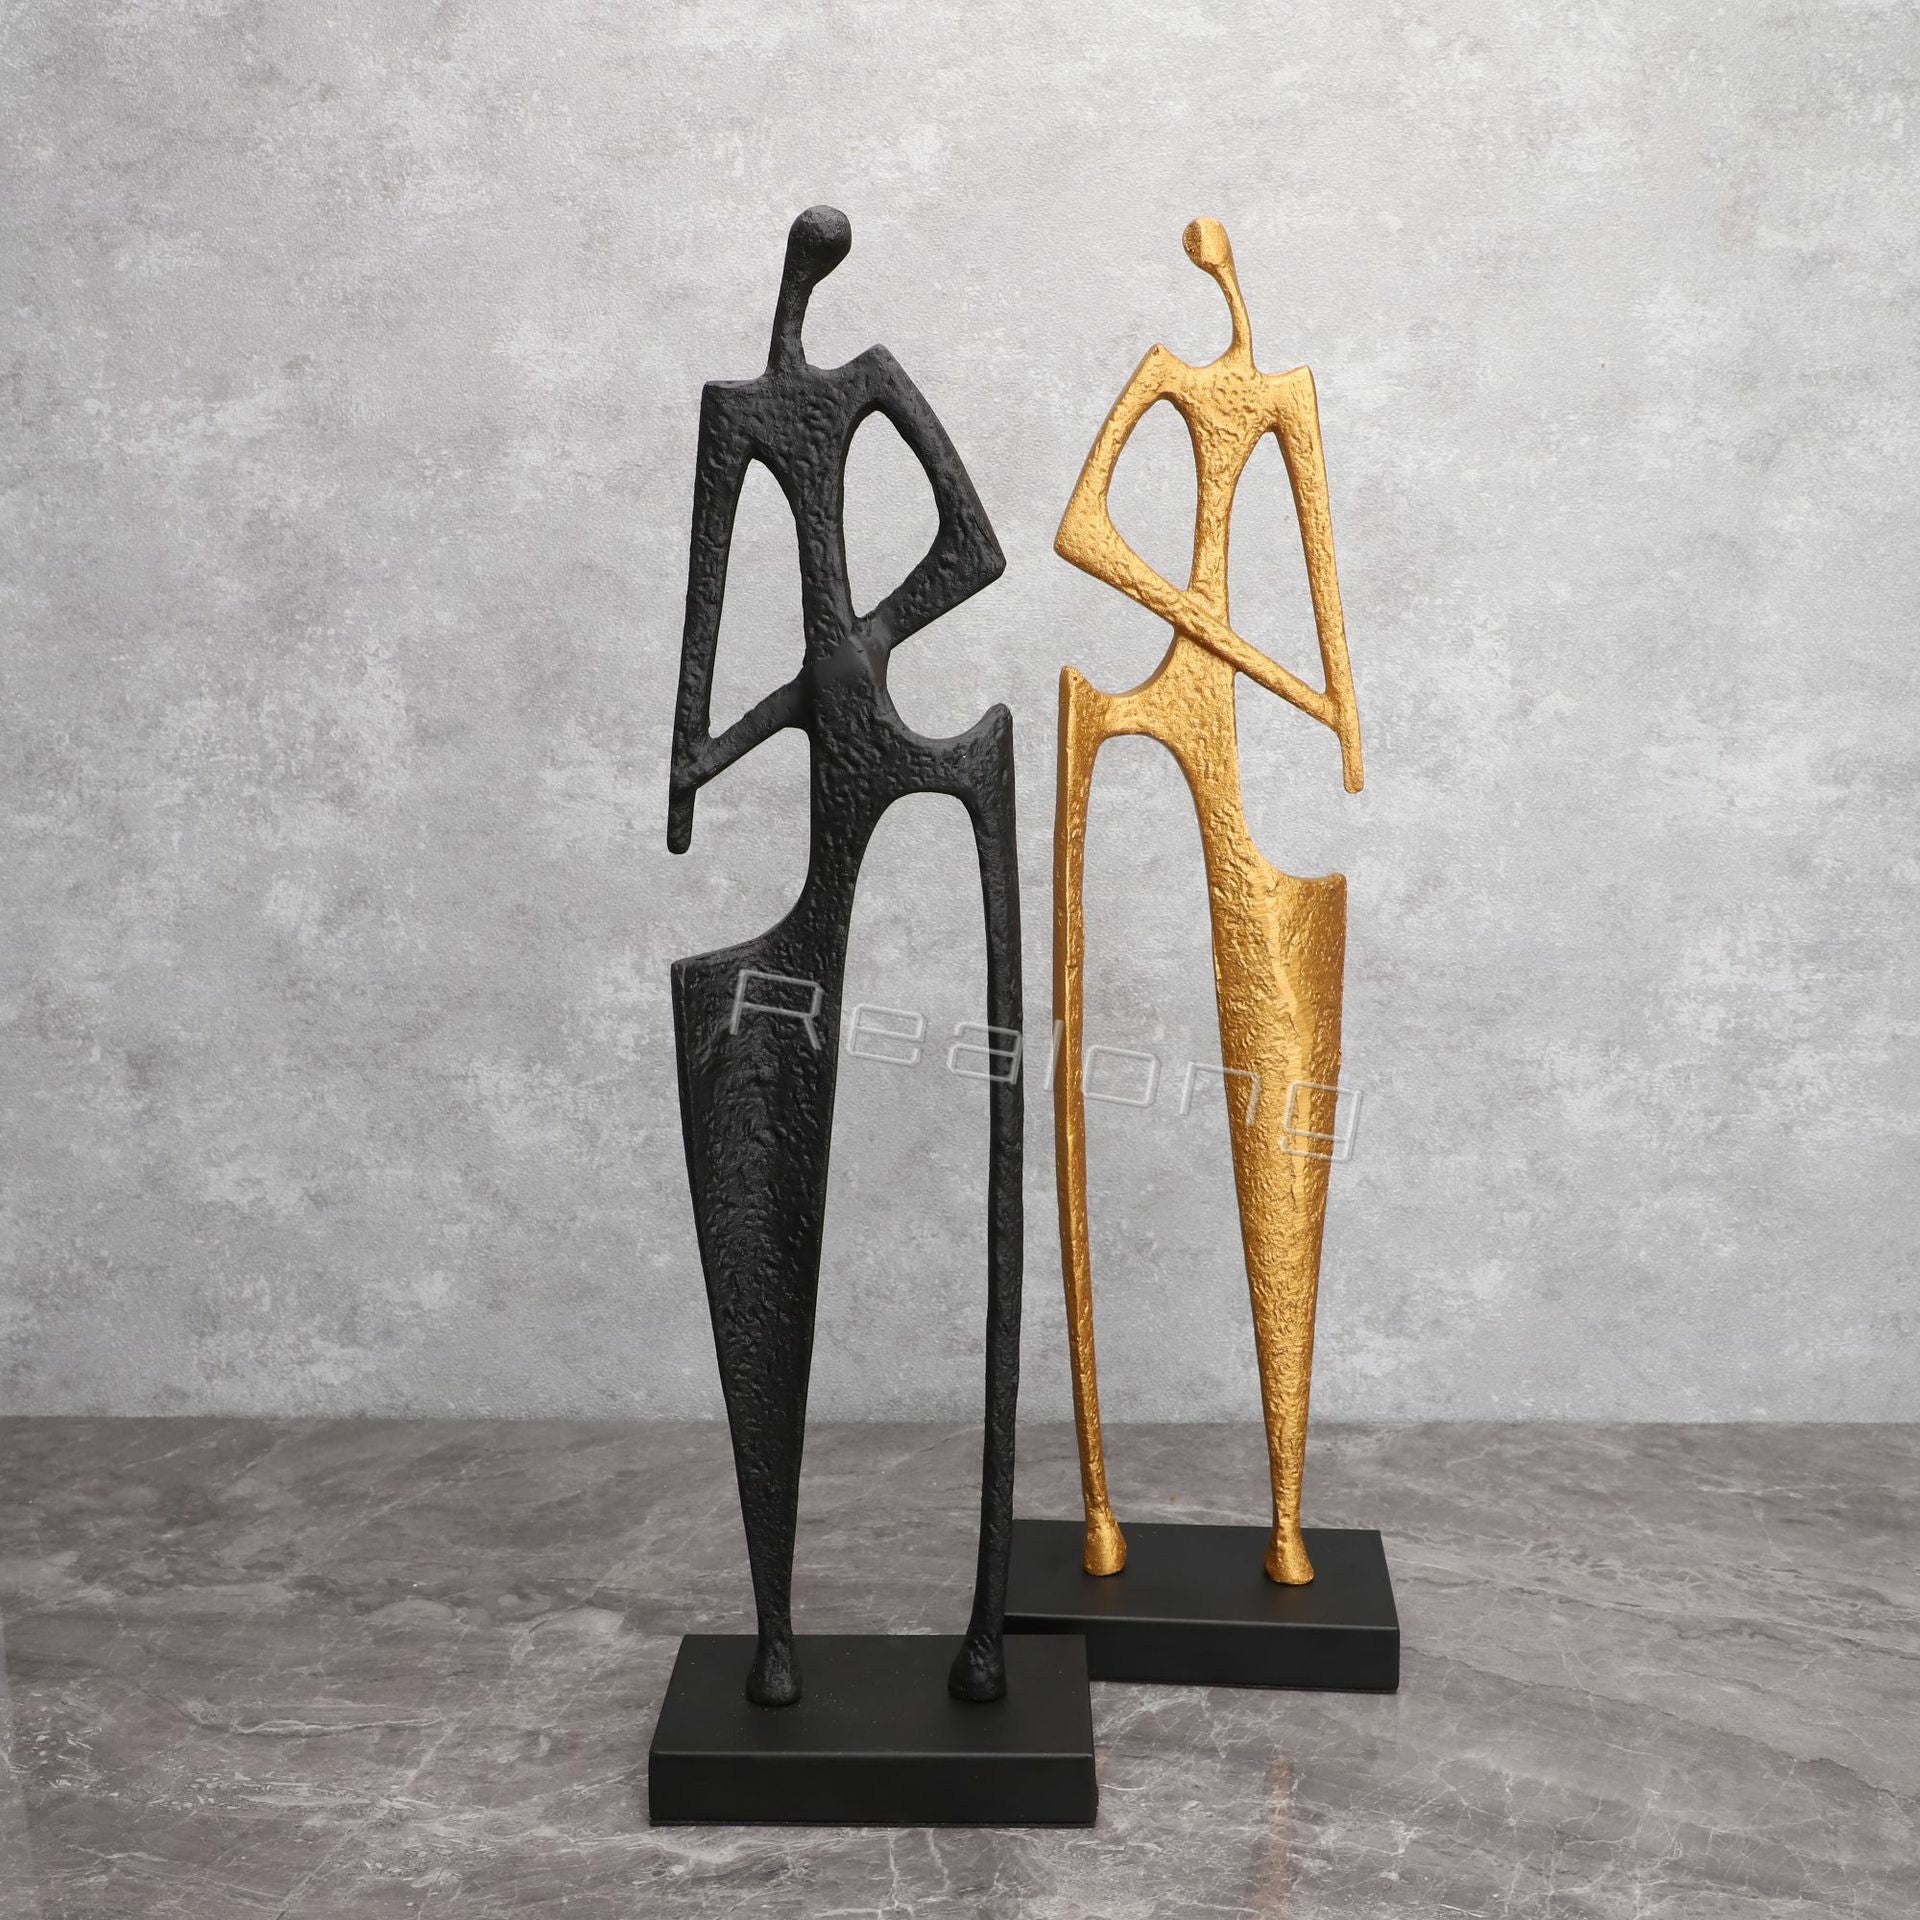 Abstract Figures Statues And Sculptures Handmade Crafts Character Statue Walking Man Metal Sculpture For Home Hotel Office Decor